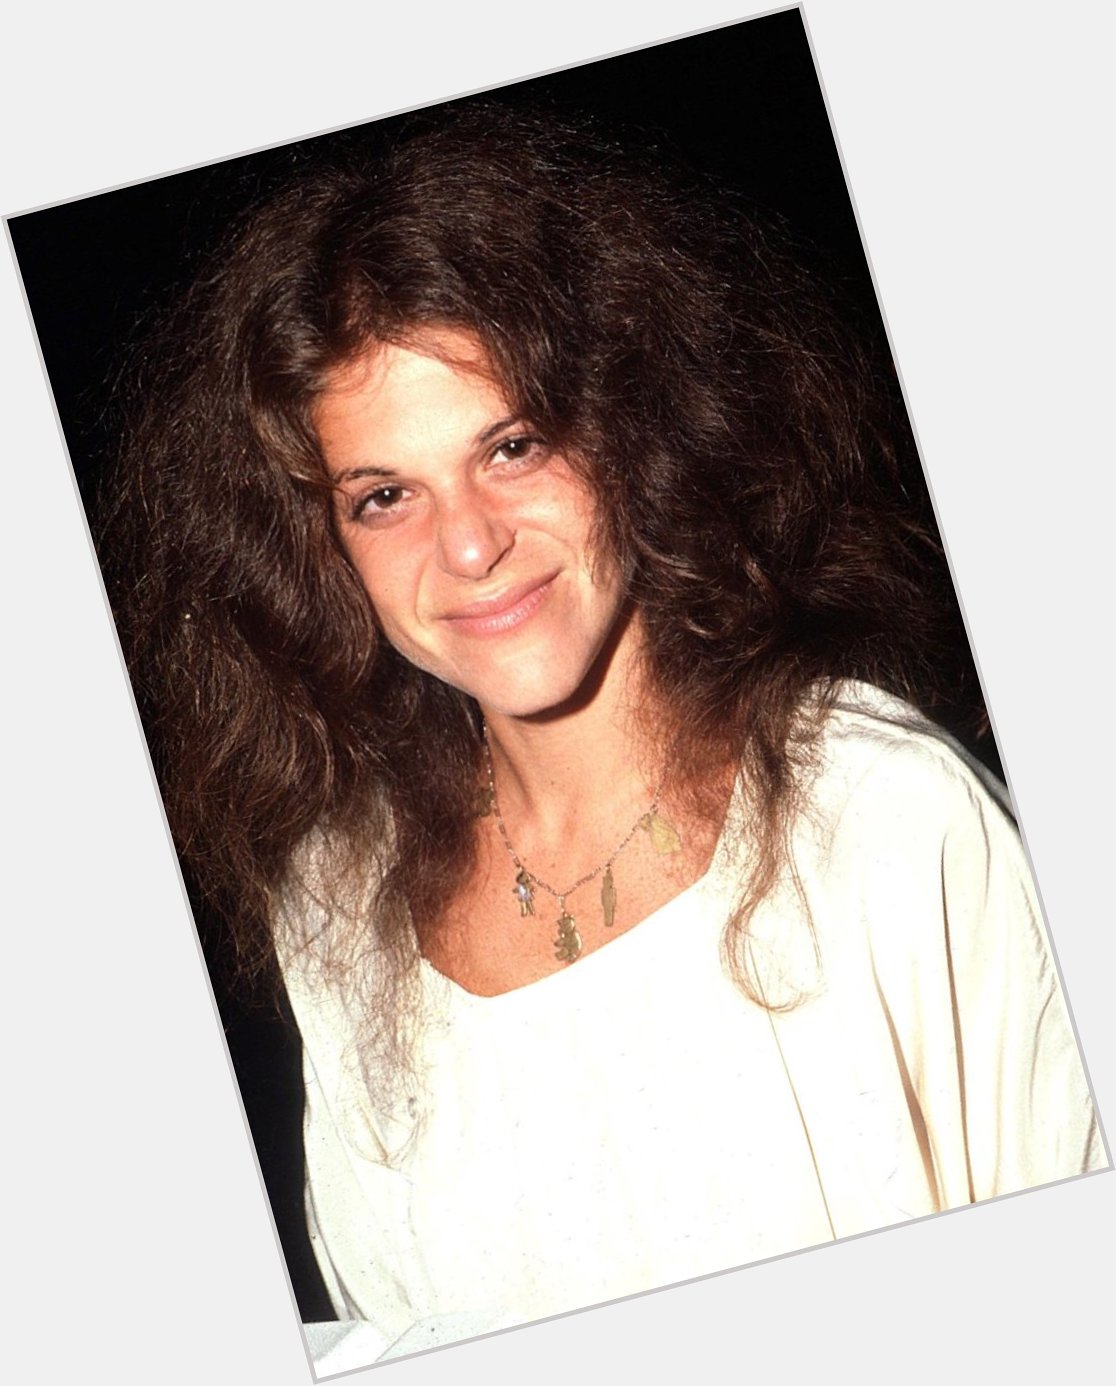 HAPPY BIRTHDAY TO THE LATE GILDA RADNER WHO WOULD\VE TURNED 76 TODAY. 